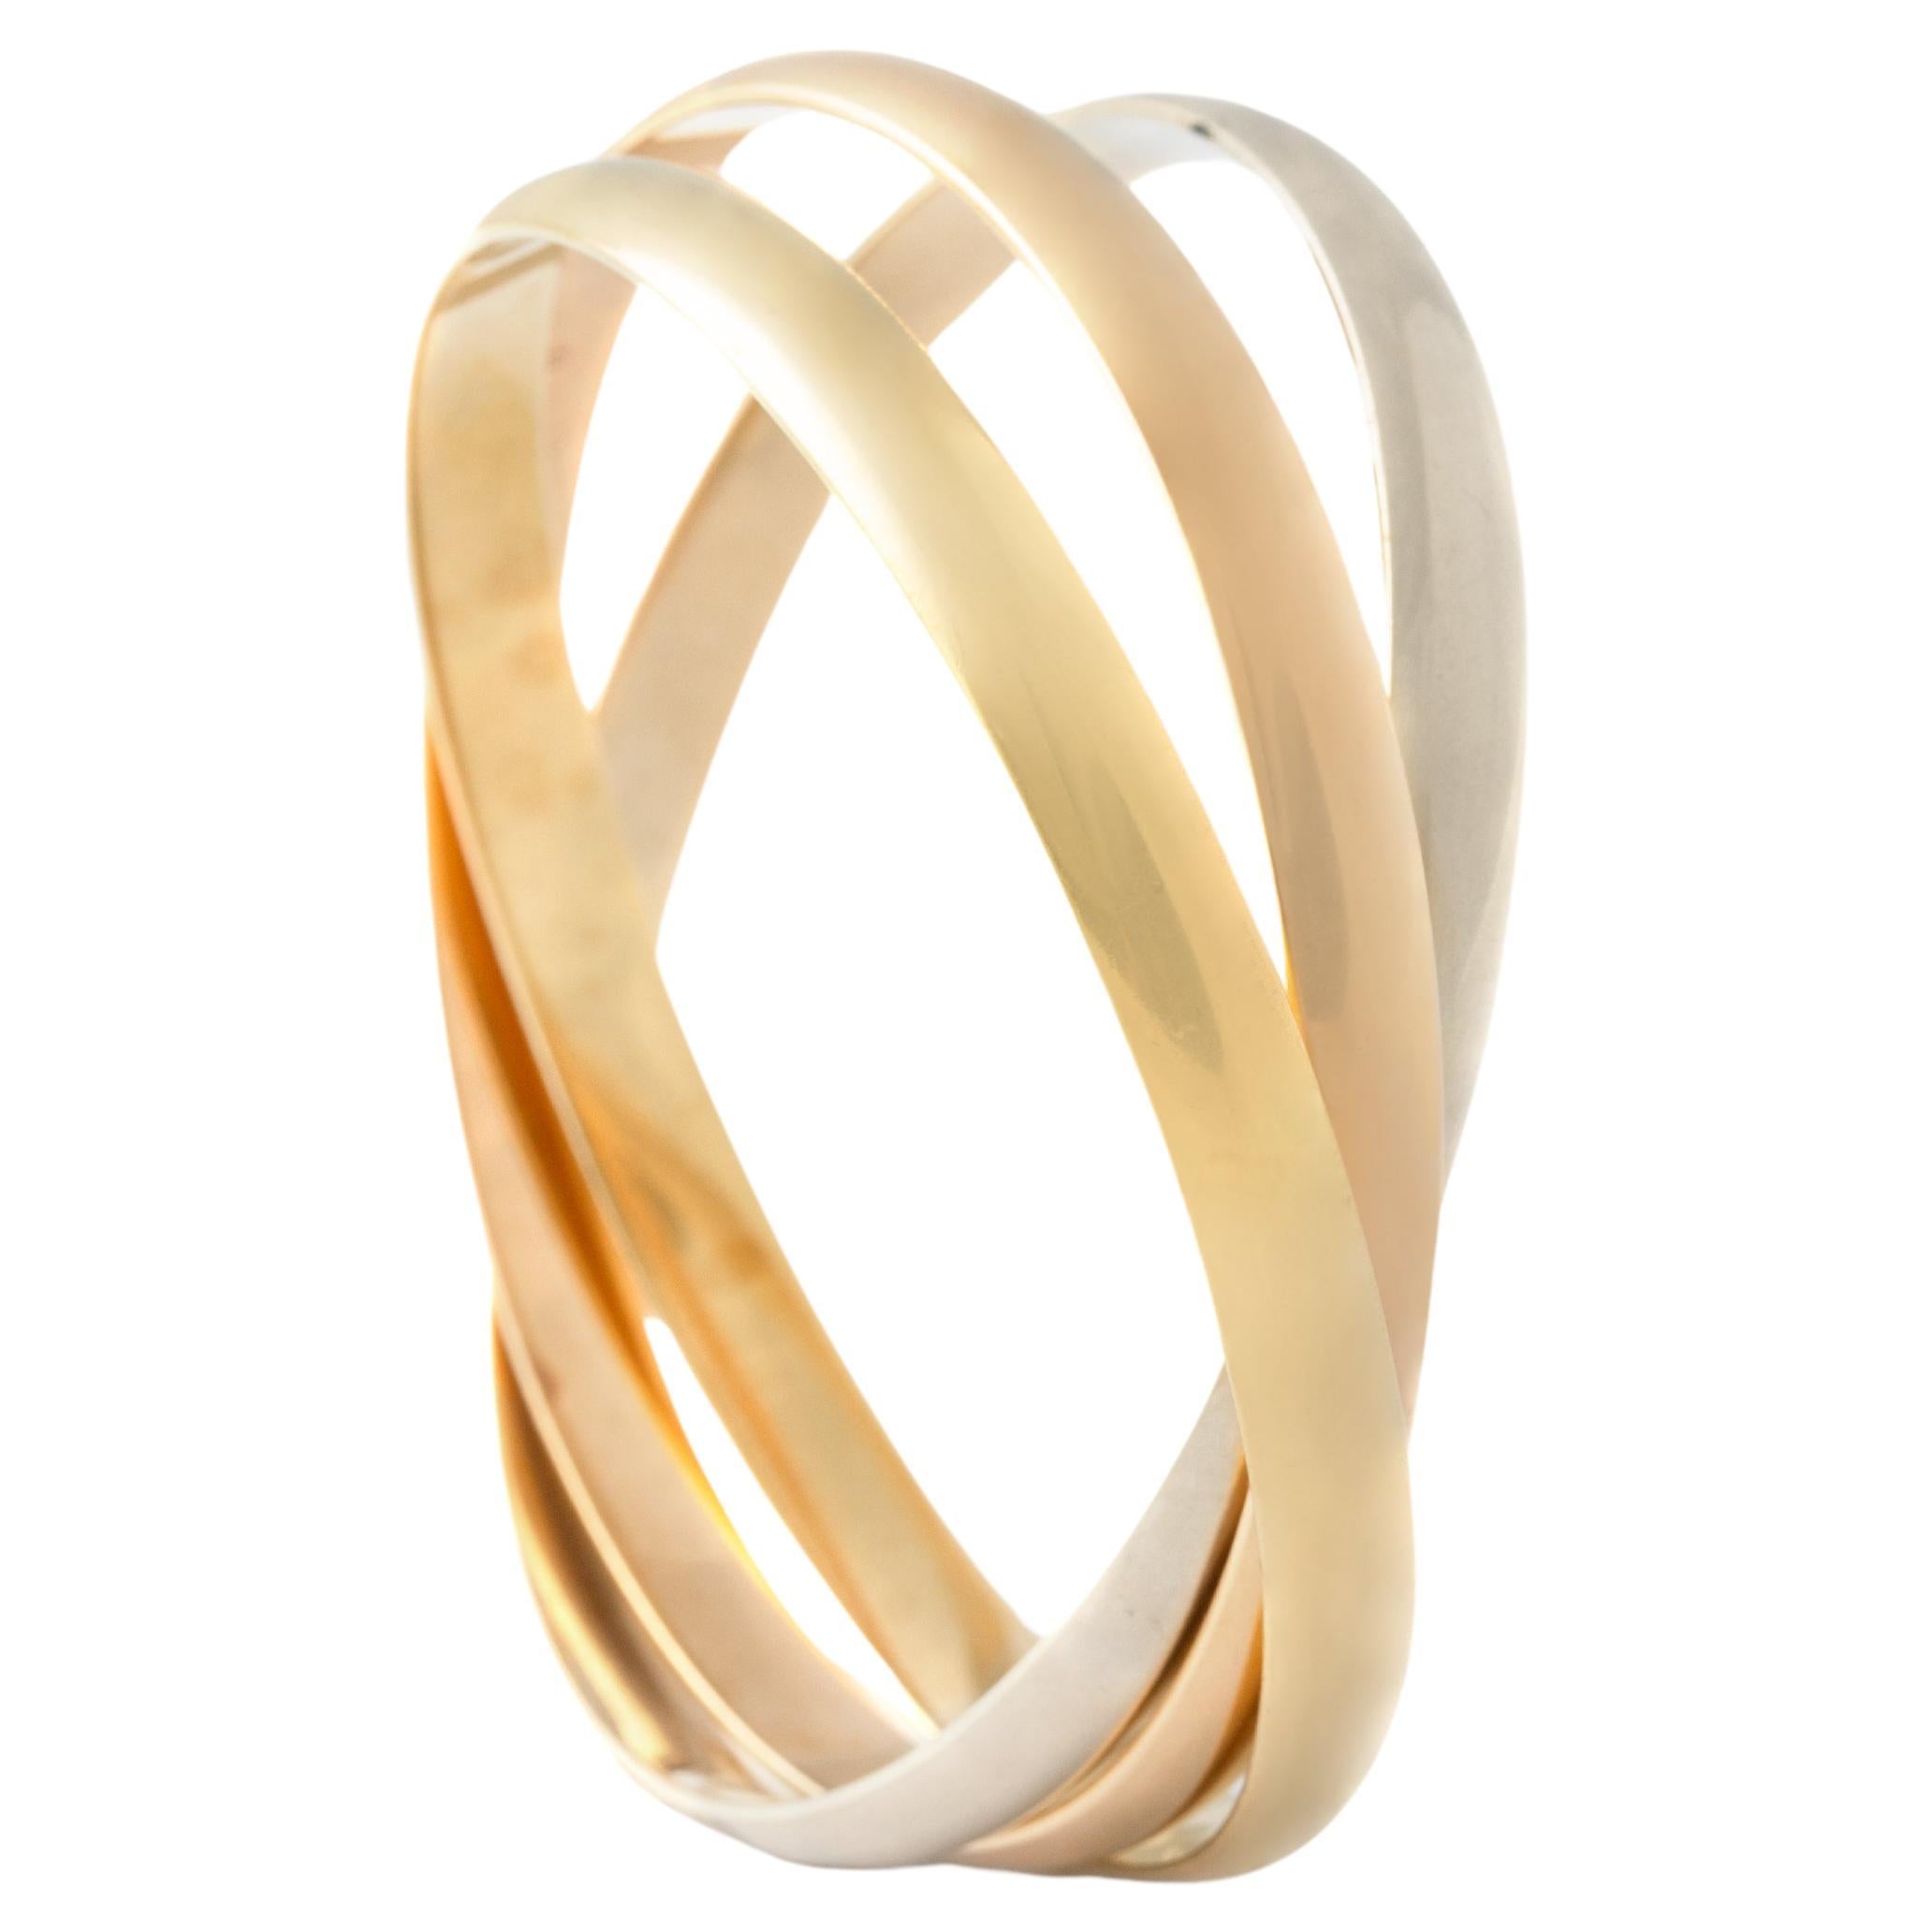 Cartier Trinity Bracelet tri-color Gold 18K.
Signed Cartier, numbered and marked.
Total weight: 81.36 grams.